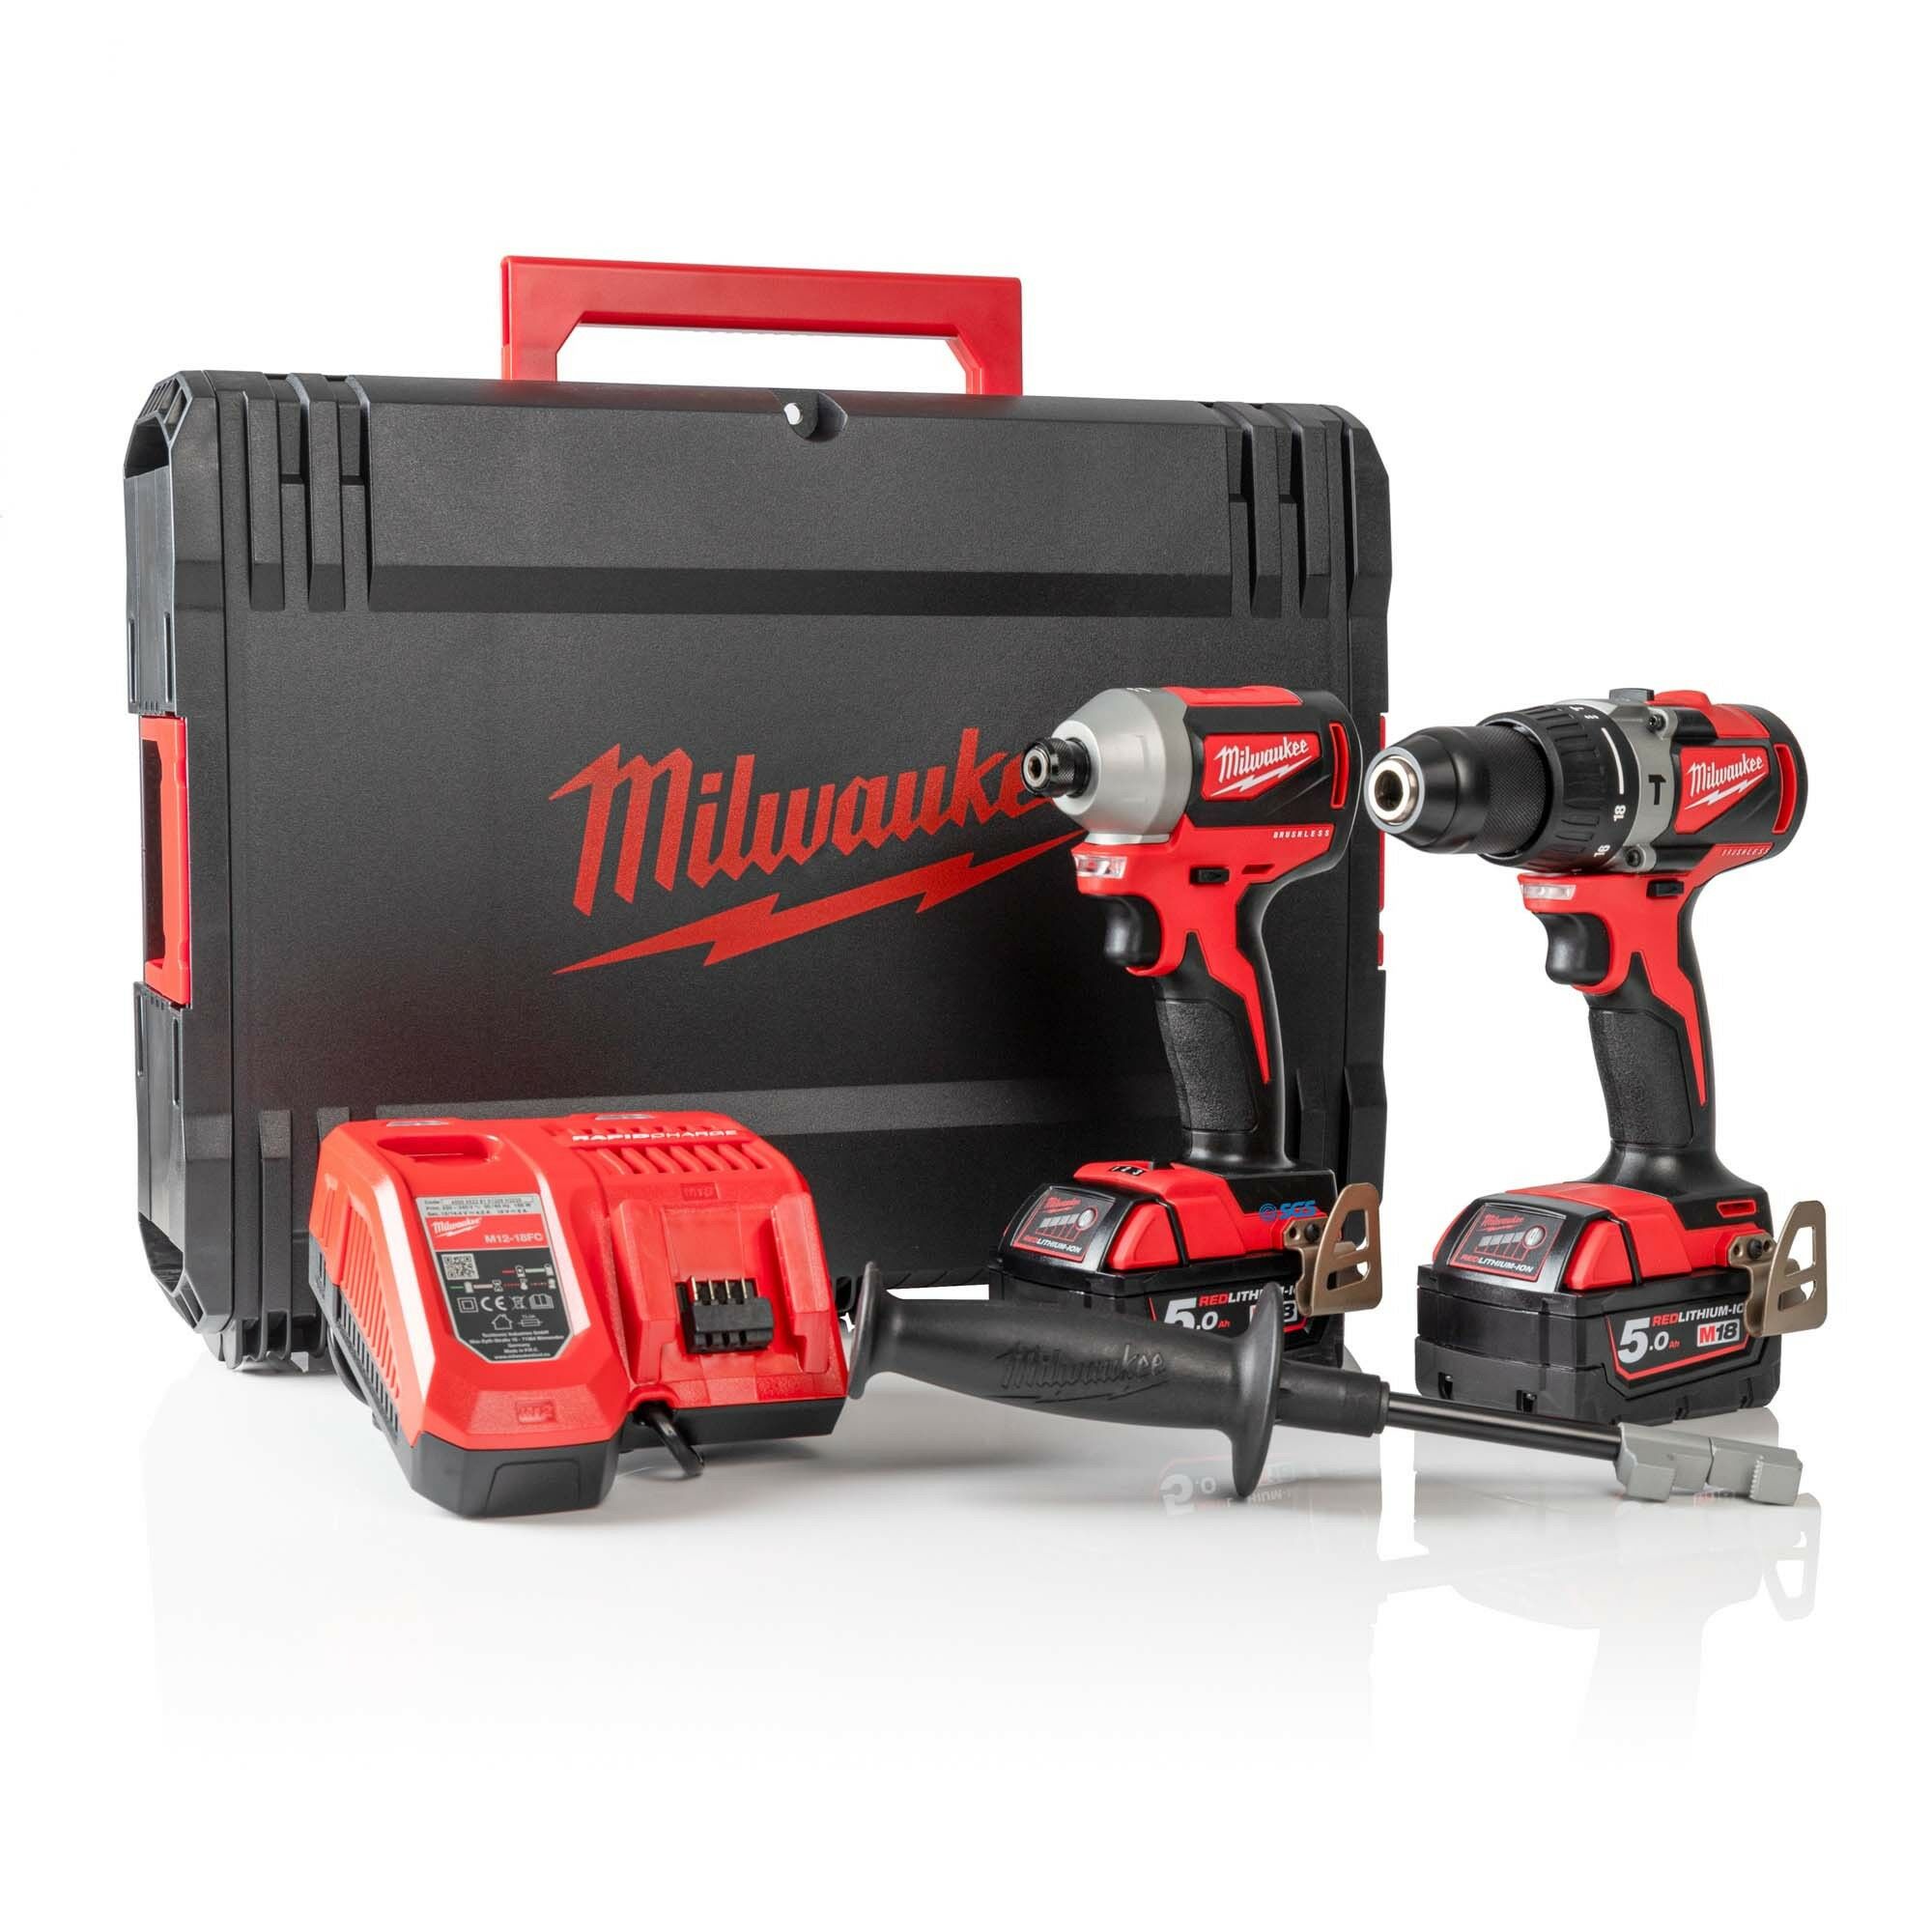 Milwaukee M18BLPP2A2-502X 18V Combi Drill and Impact Driver Kit - 2x 5Ah Batteries, Charger and Case